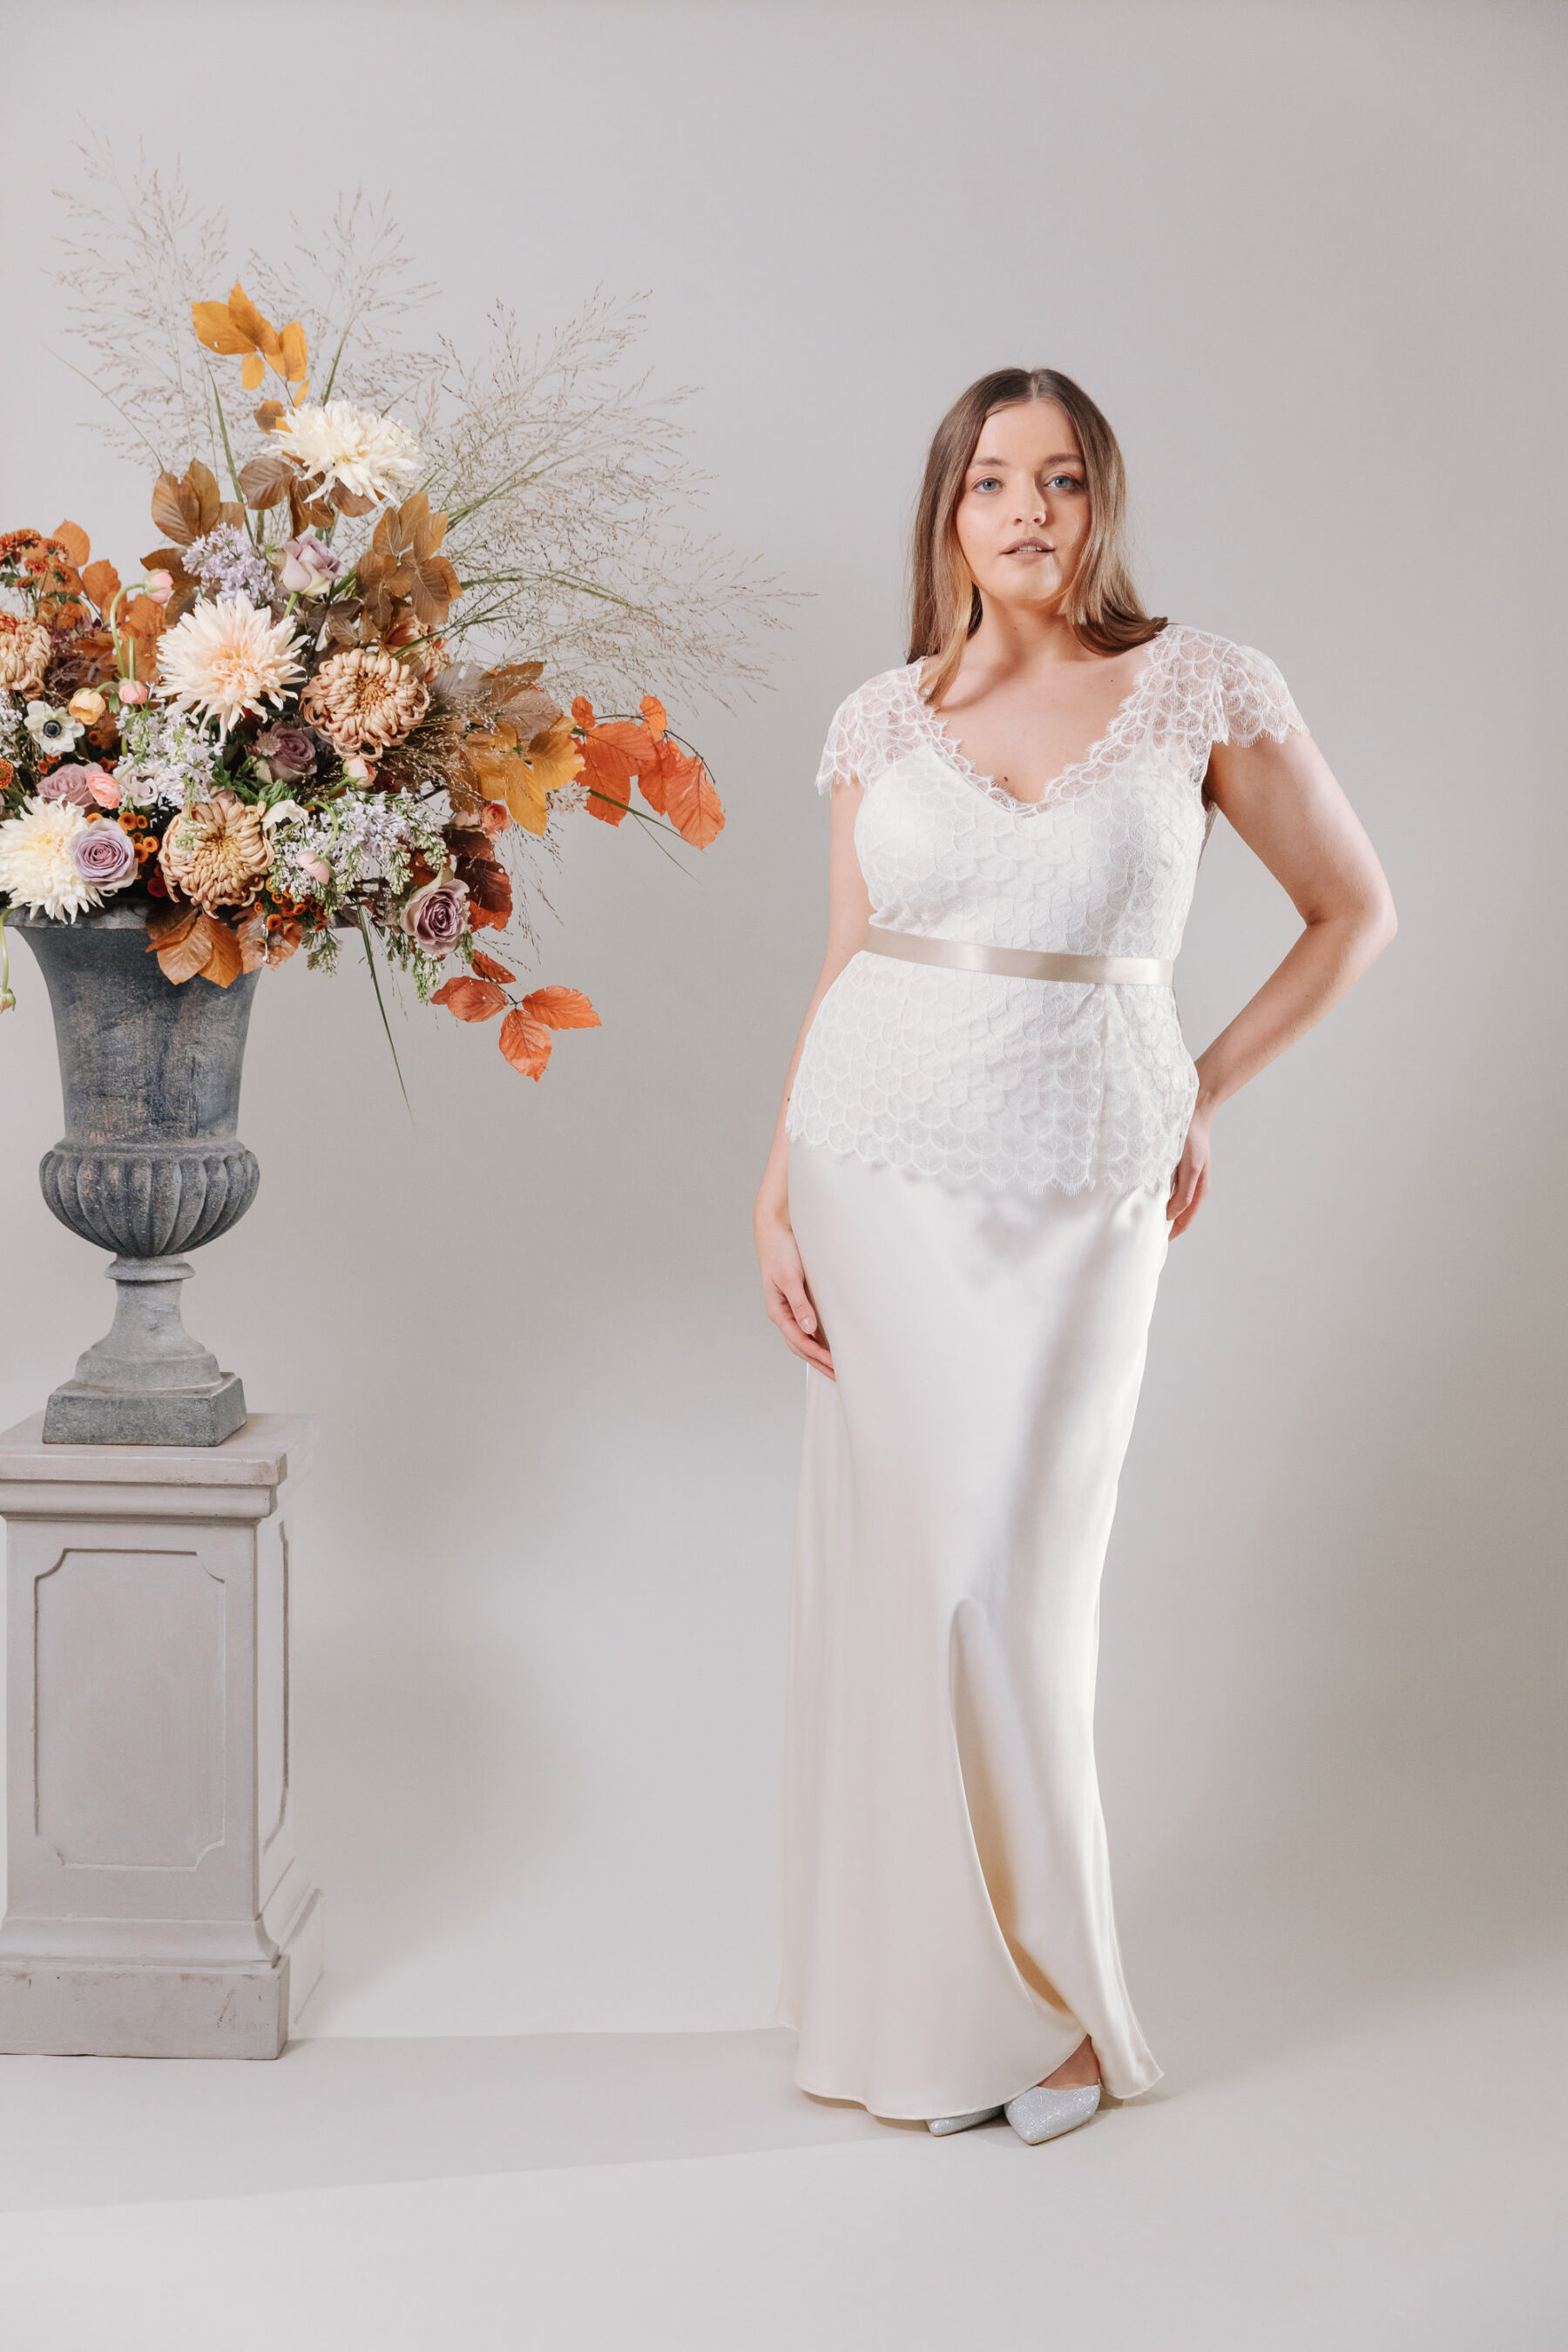 Curvy bride wedding dress by Kate Beaumont